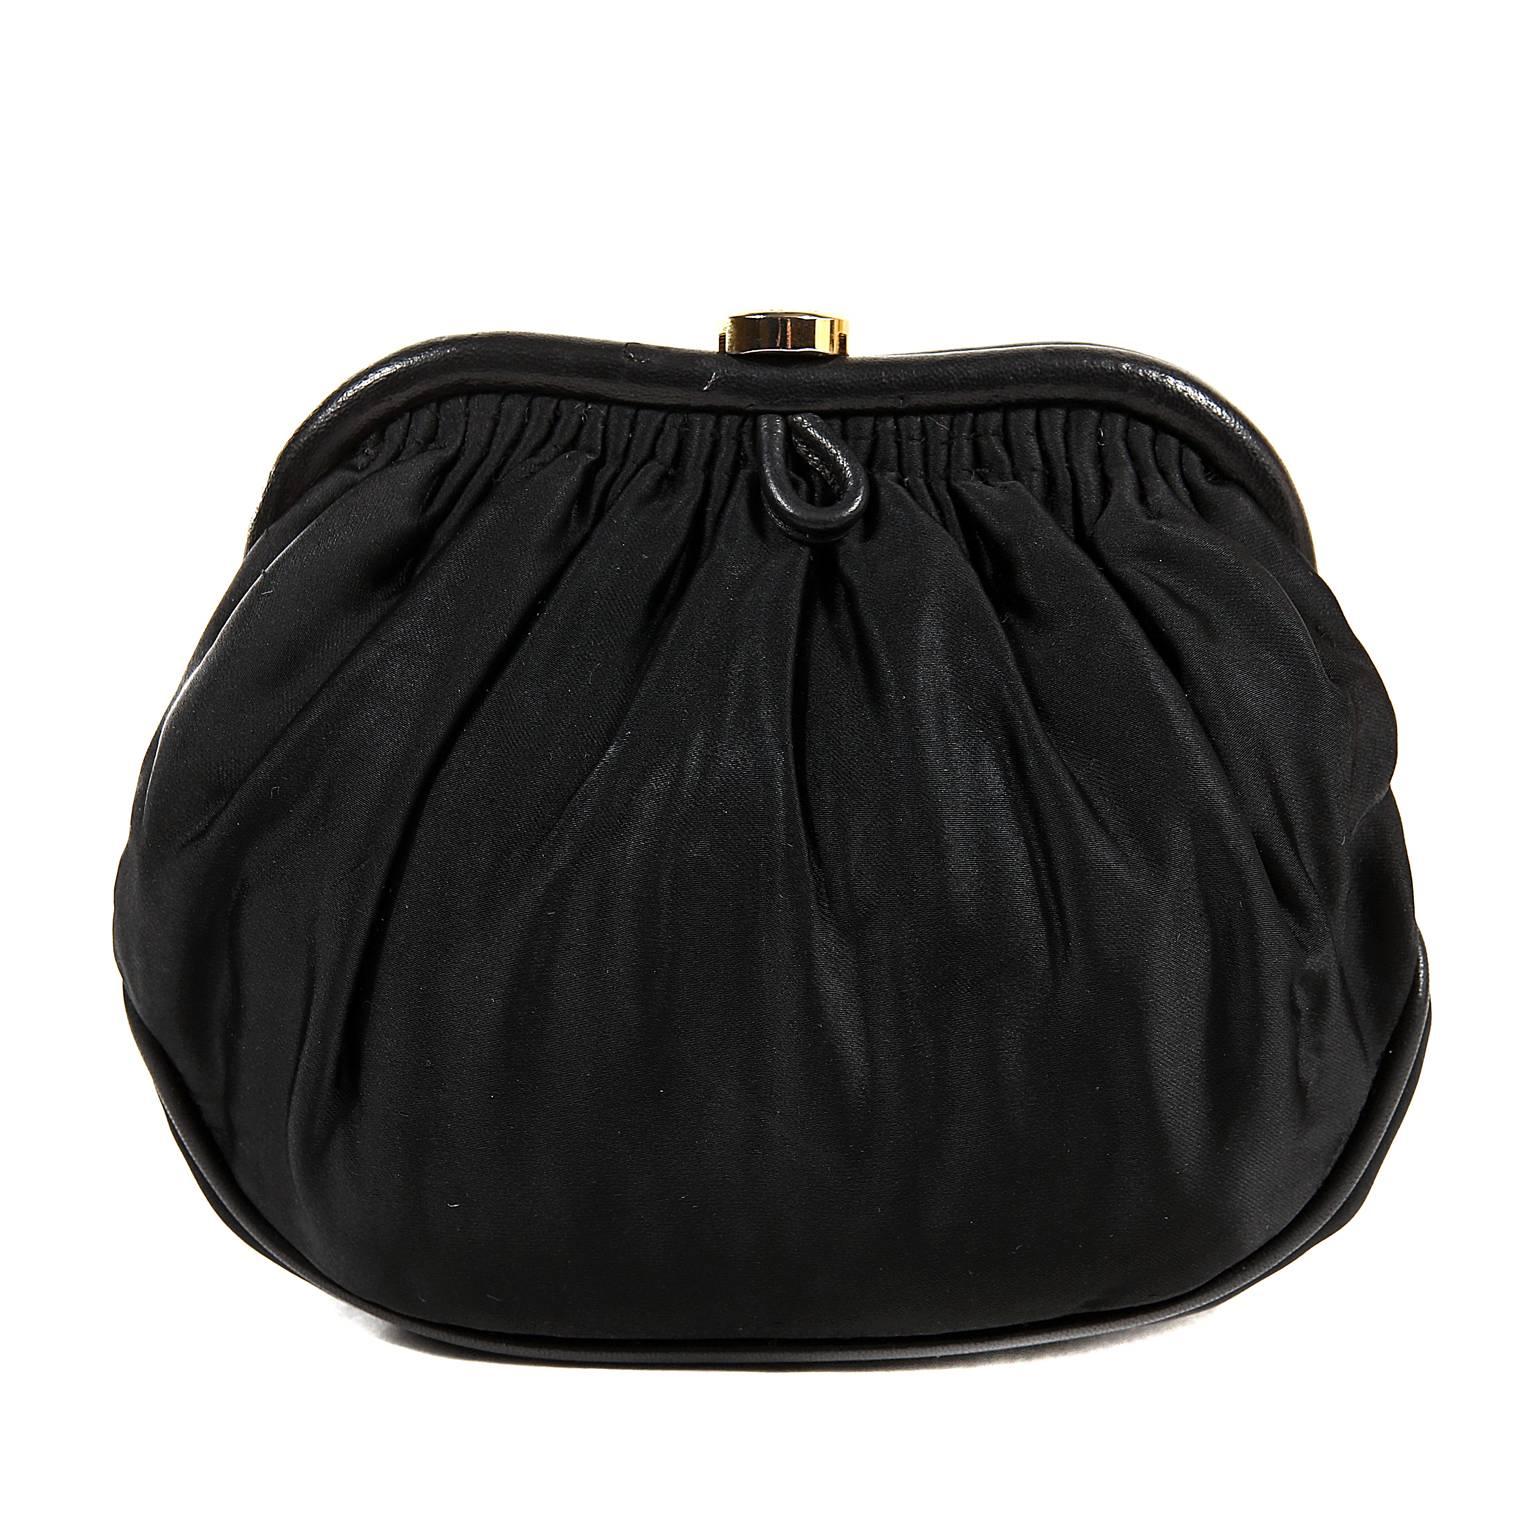 Chanel Black Vintage Evening Bag- Excellent Condition
The classic framed style and extra- long strap make it an easy choice for any occasion.
Black fabric framed bag has feminine pleating and black leather piping.  A gold CC coin acts as a kiss lock